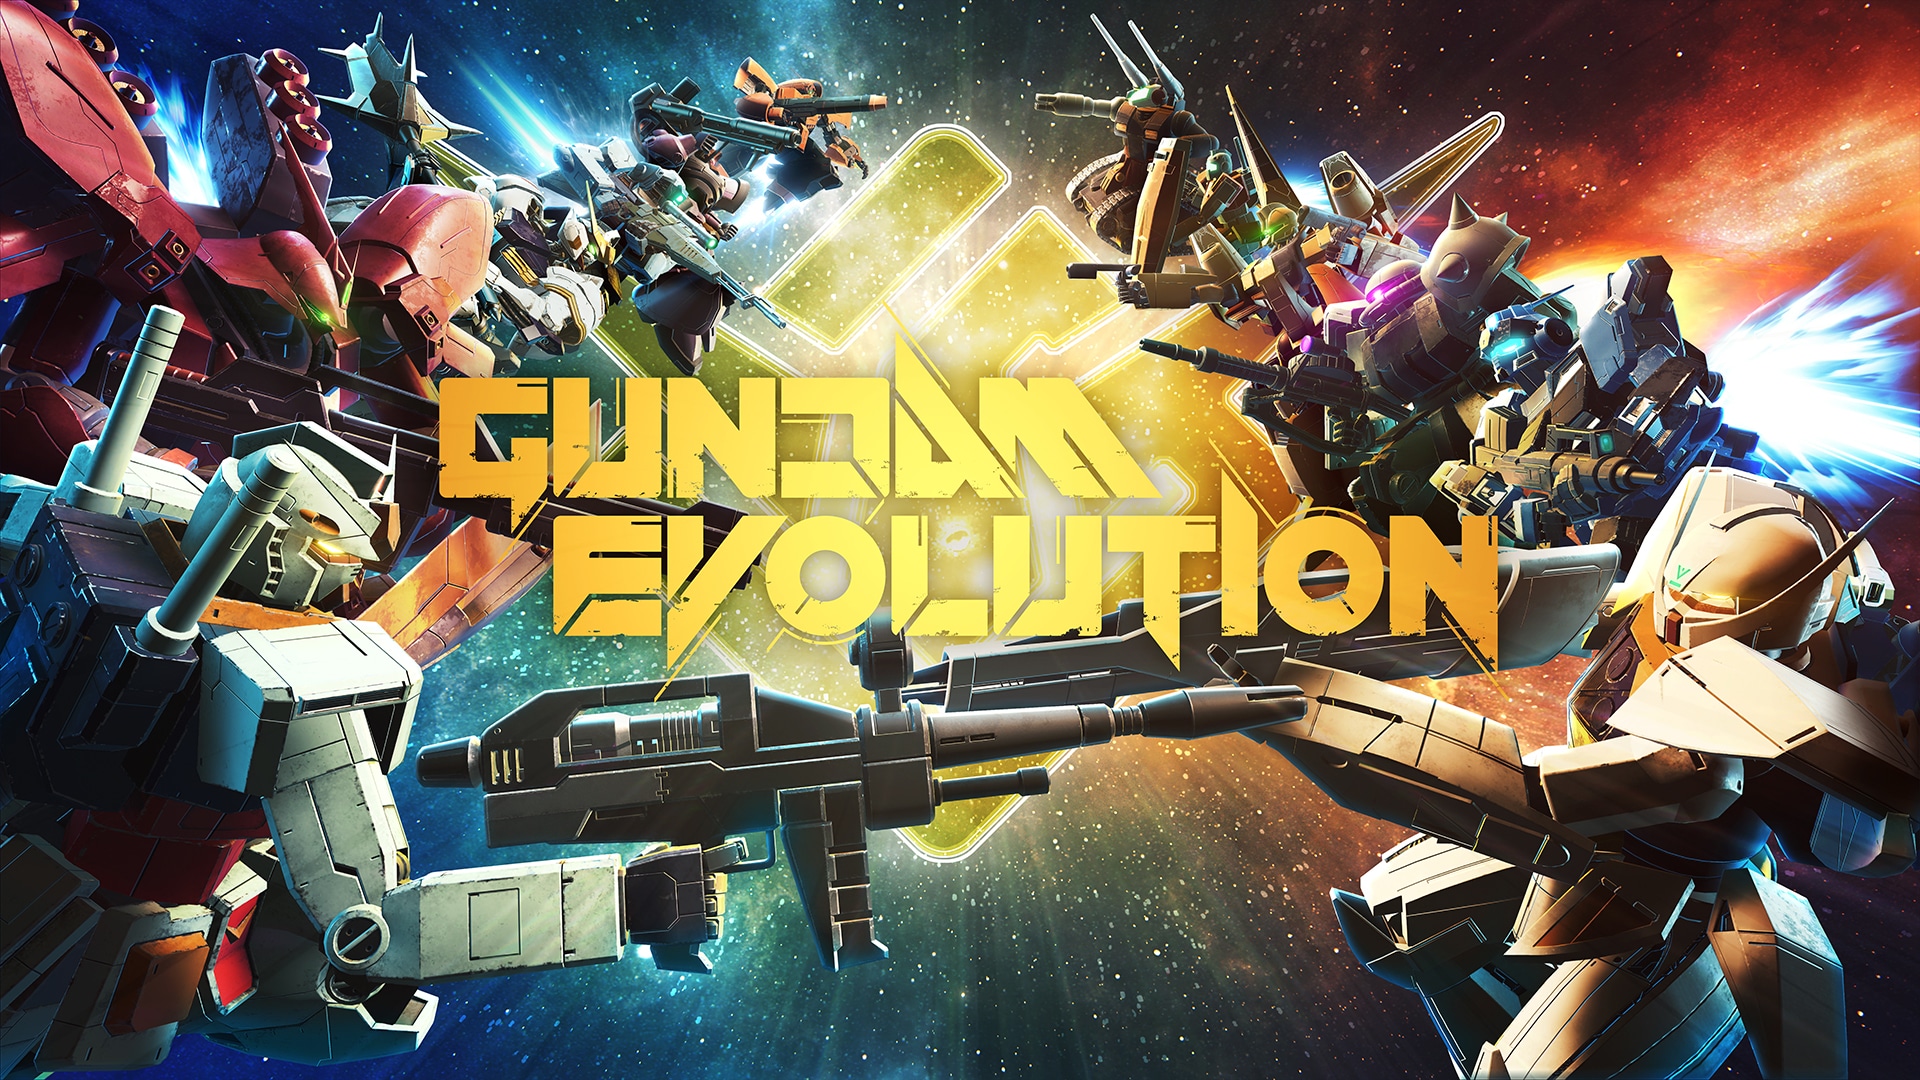 What we know about Gundam Evolution: the new video game from Bandai Namco thumbnail